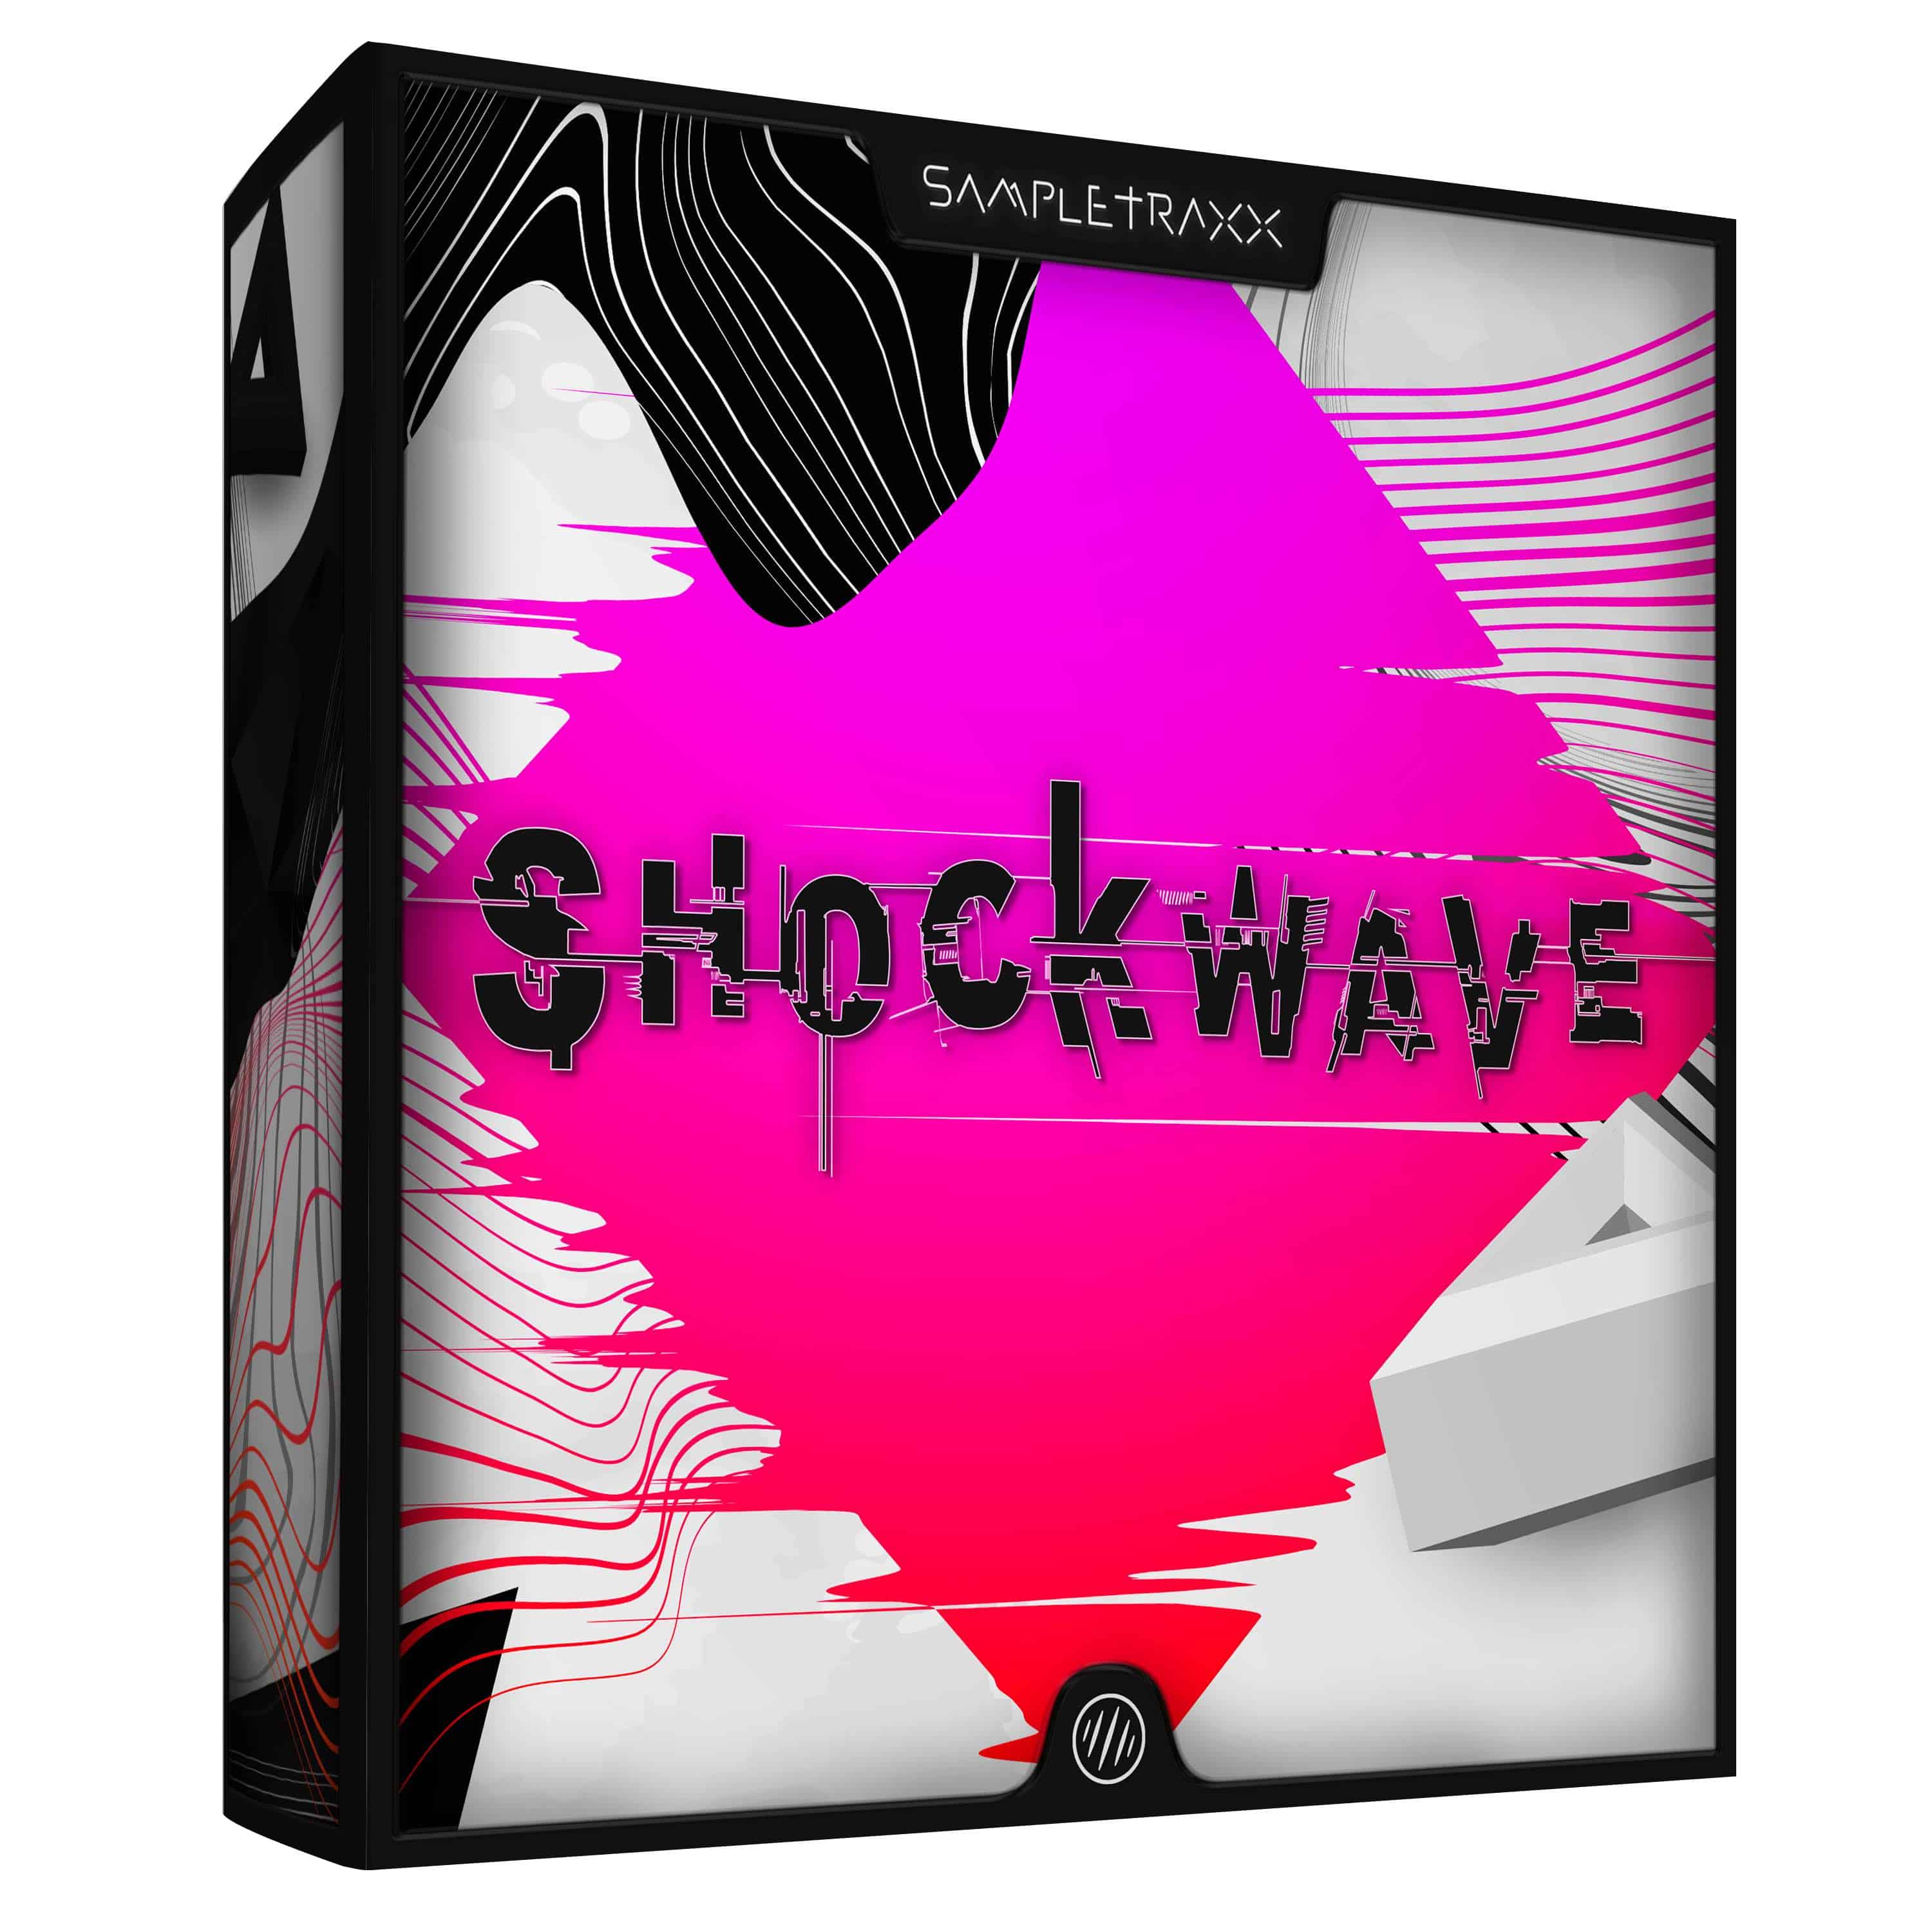 SHOCKWAVE by SampleTraxx Released